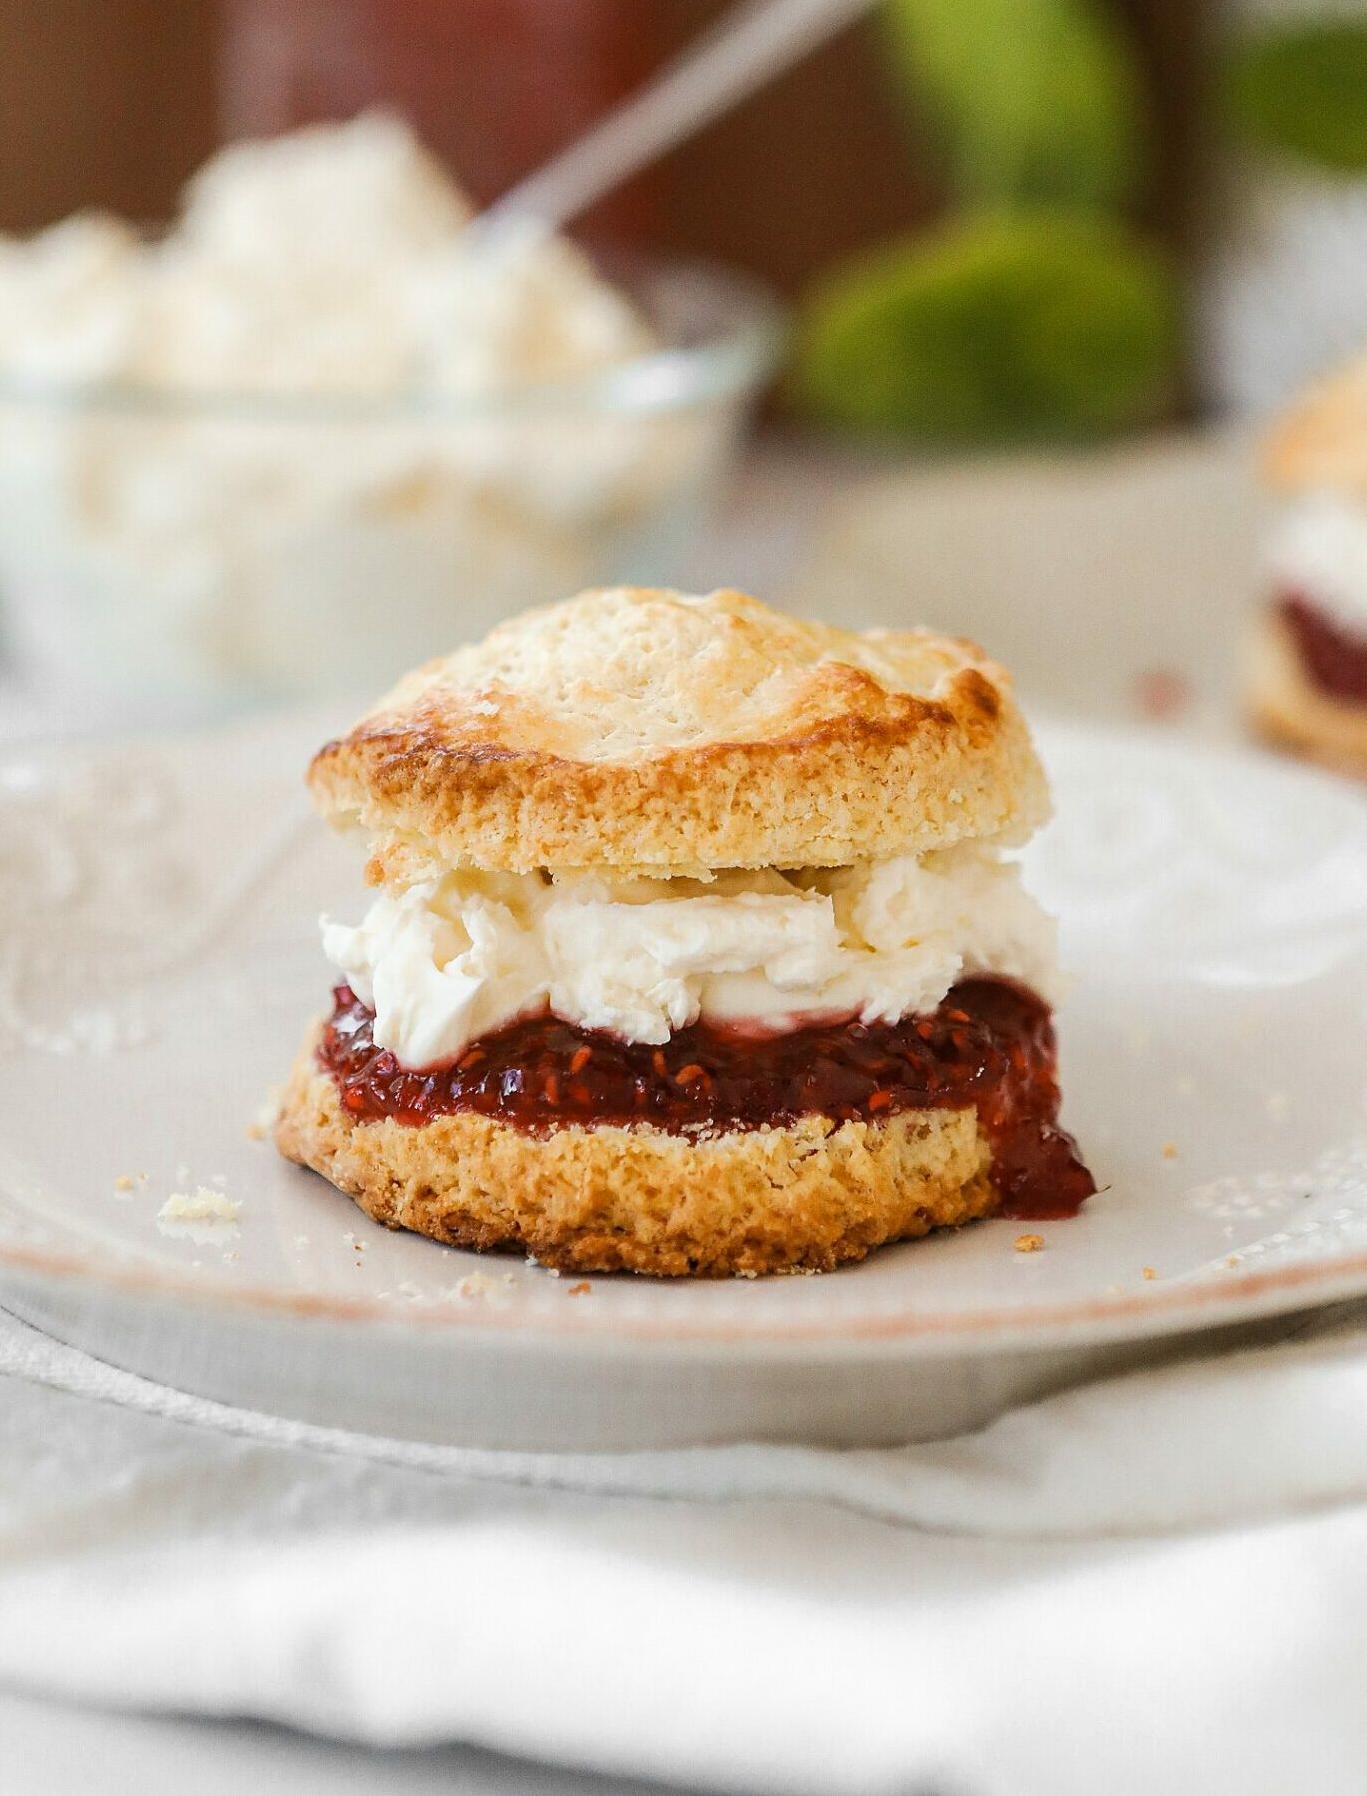  Flaky on the outside, light and airy on the inside, these scones are everything you’ve been missing